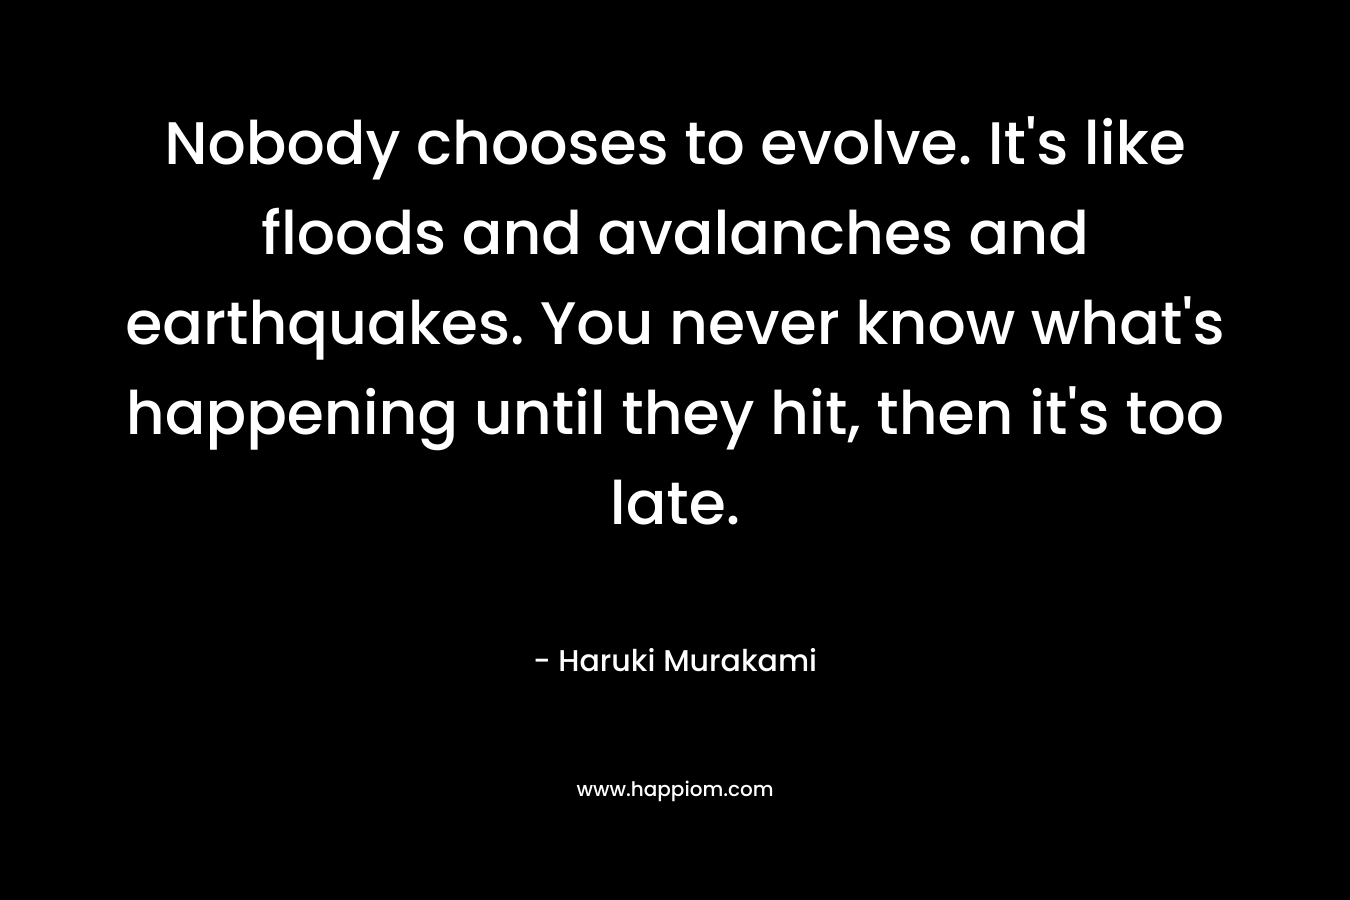 Nobody chooses to evolve. It’s like floods and avalanches and earthquakes. You never know what’s happening until they hit, then it’s too late. – Haruki Murakami